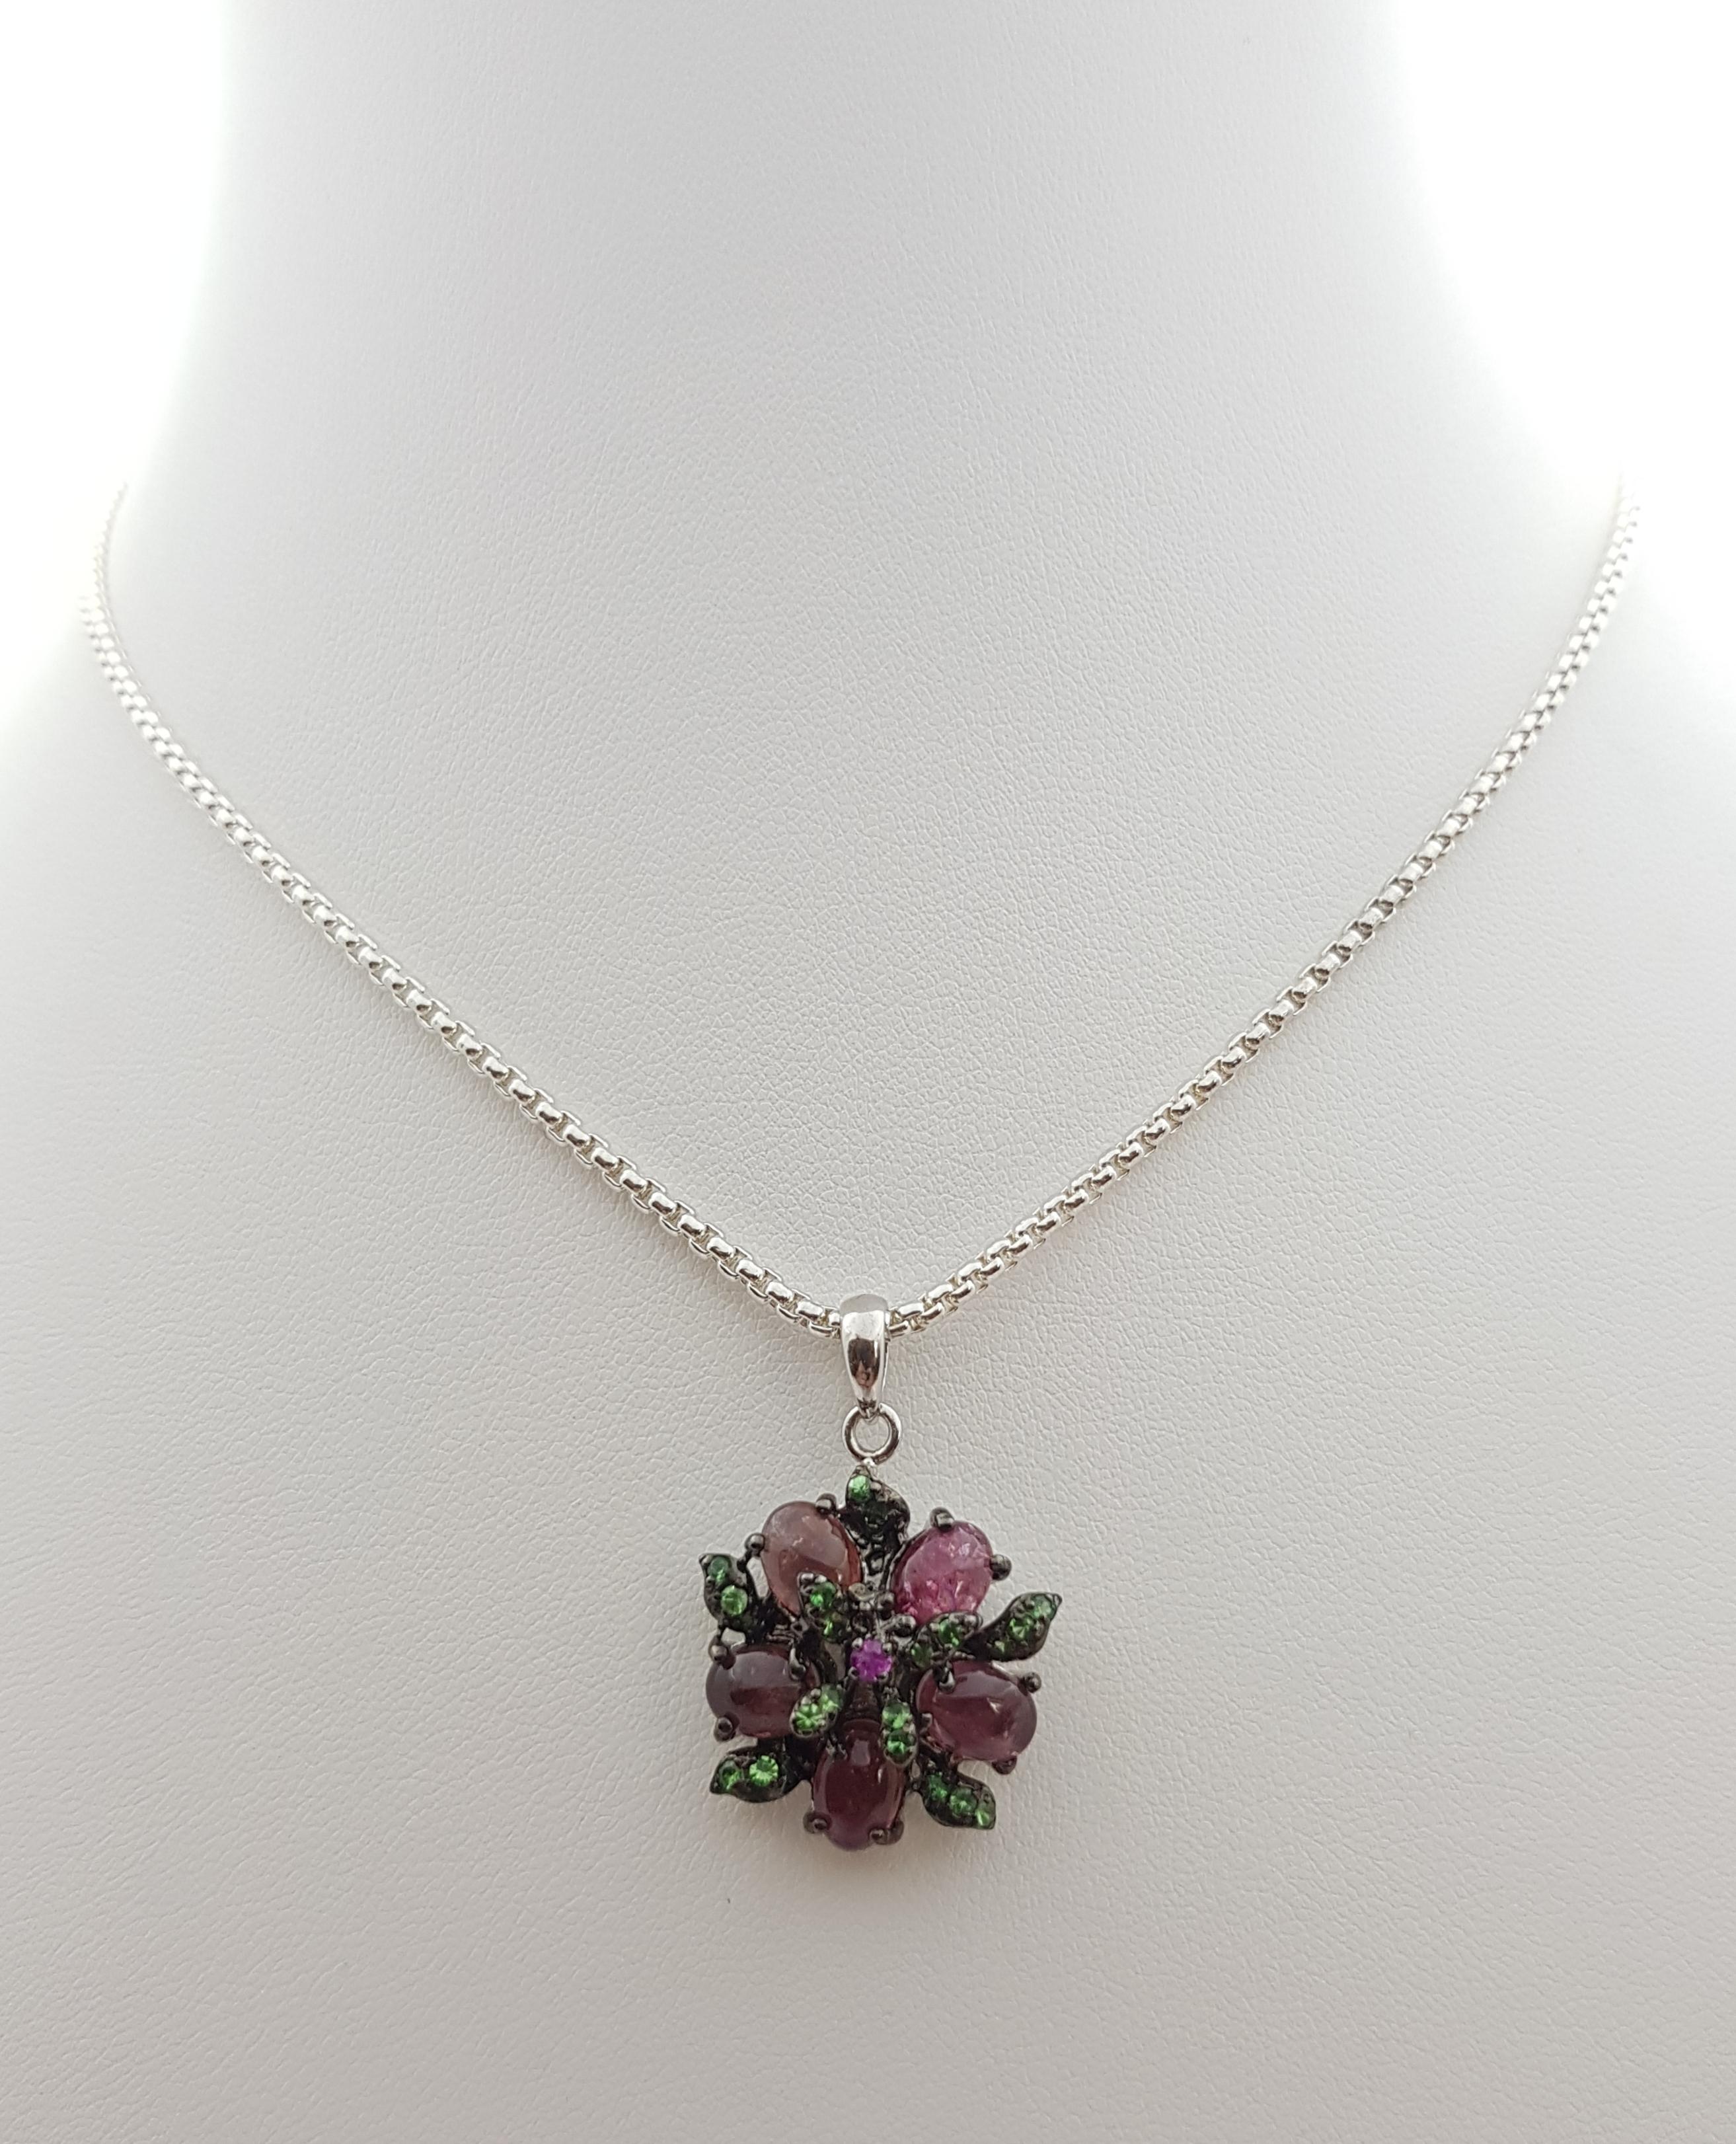 Tourmaline, Tsavorite and Pink Sapphire Pendant set in Silver Settings
(chain not included)

Width: 2.2 cm 
Length: 3.1 cm
Total Weight: 4.84  grams

*Please note that the silver setting is plated with rhodium to promote shine and help prevent